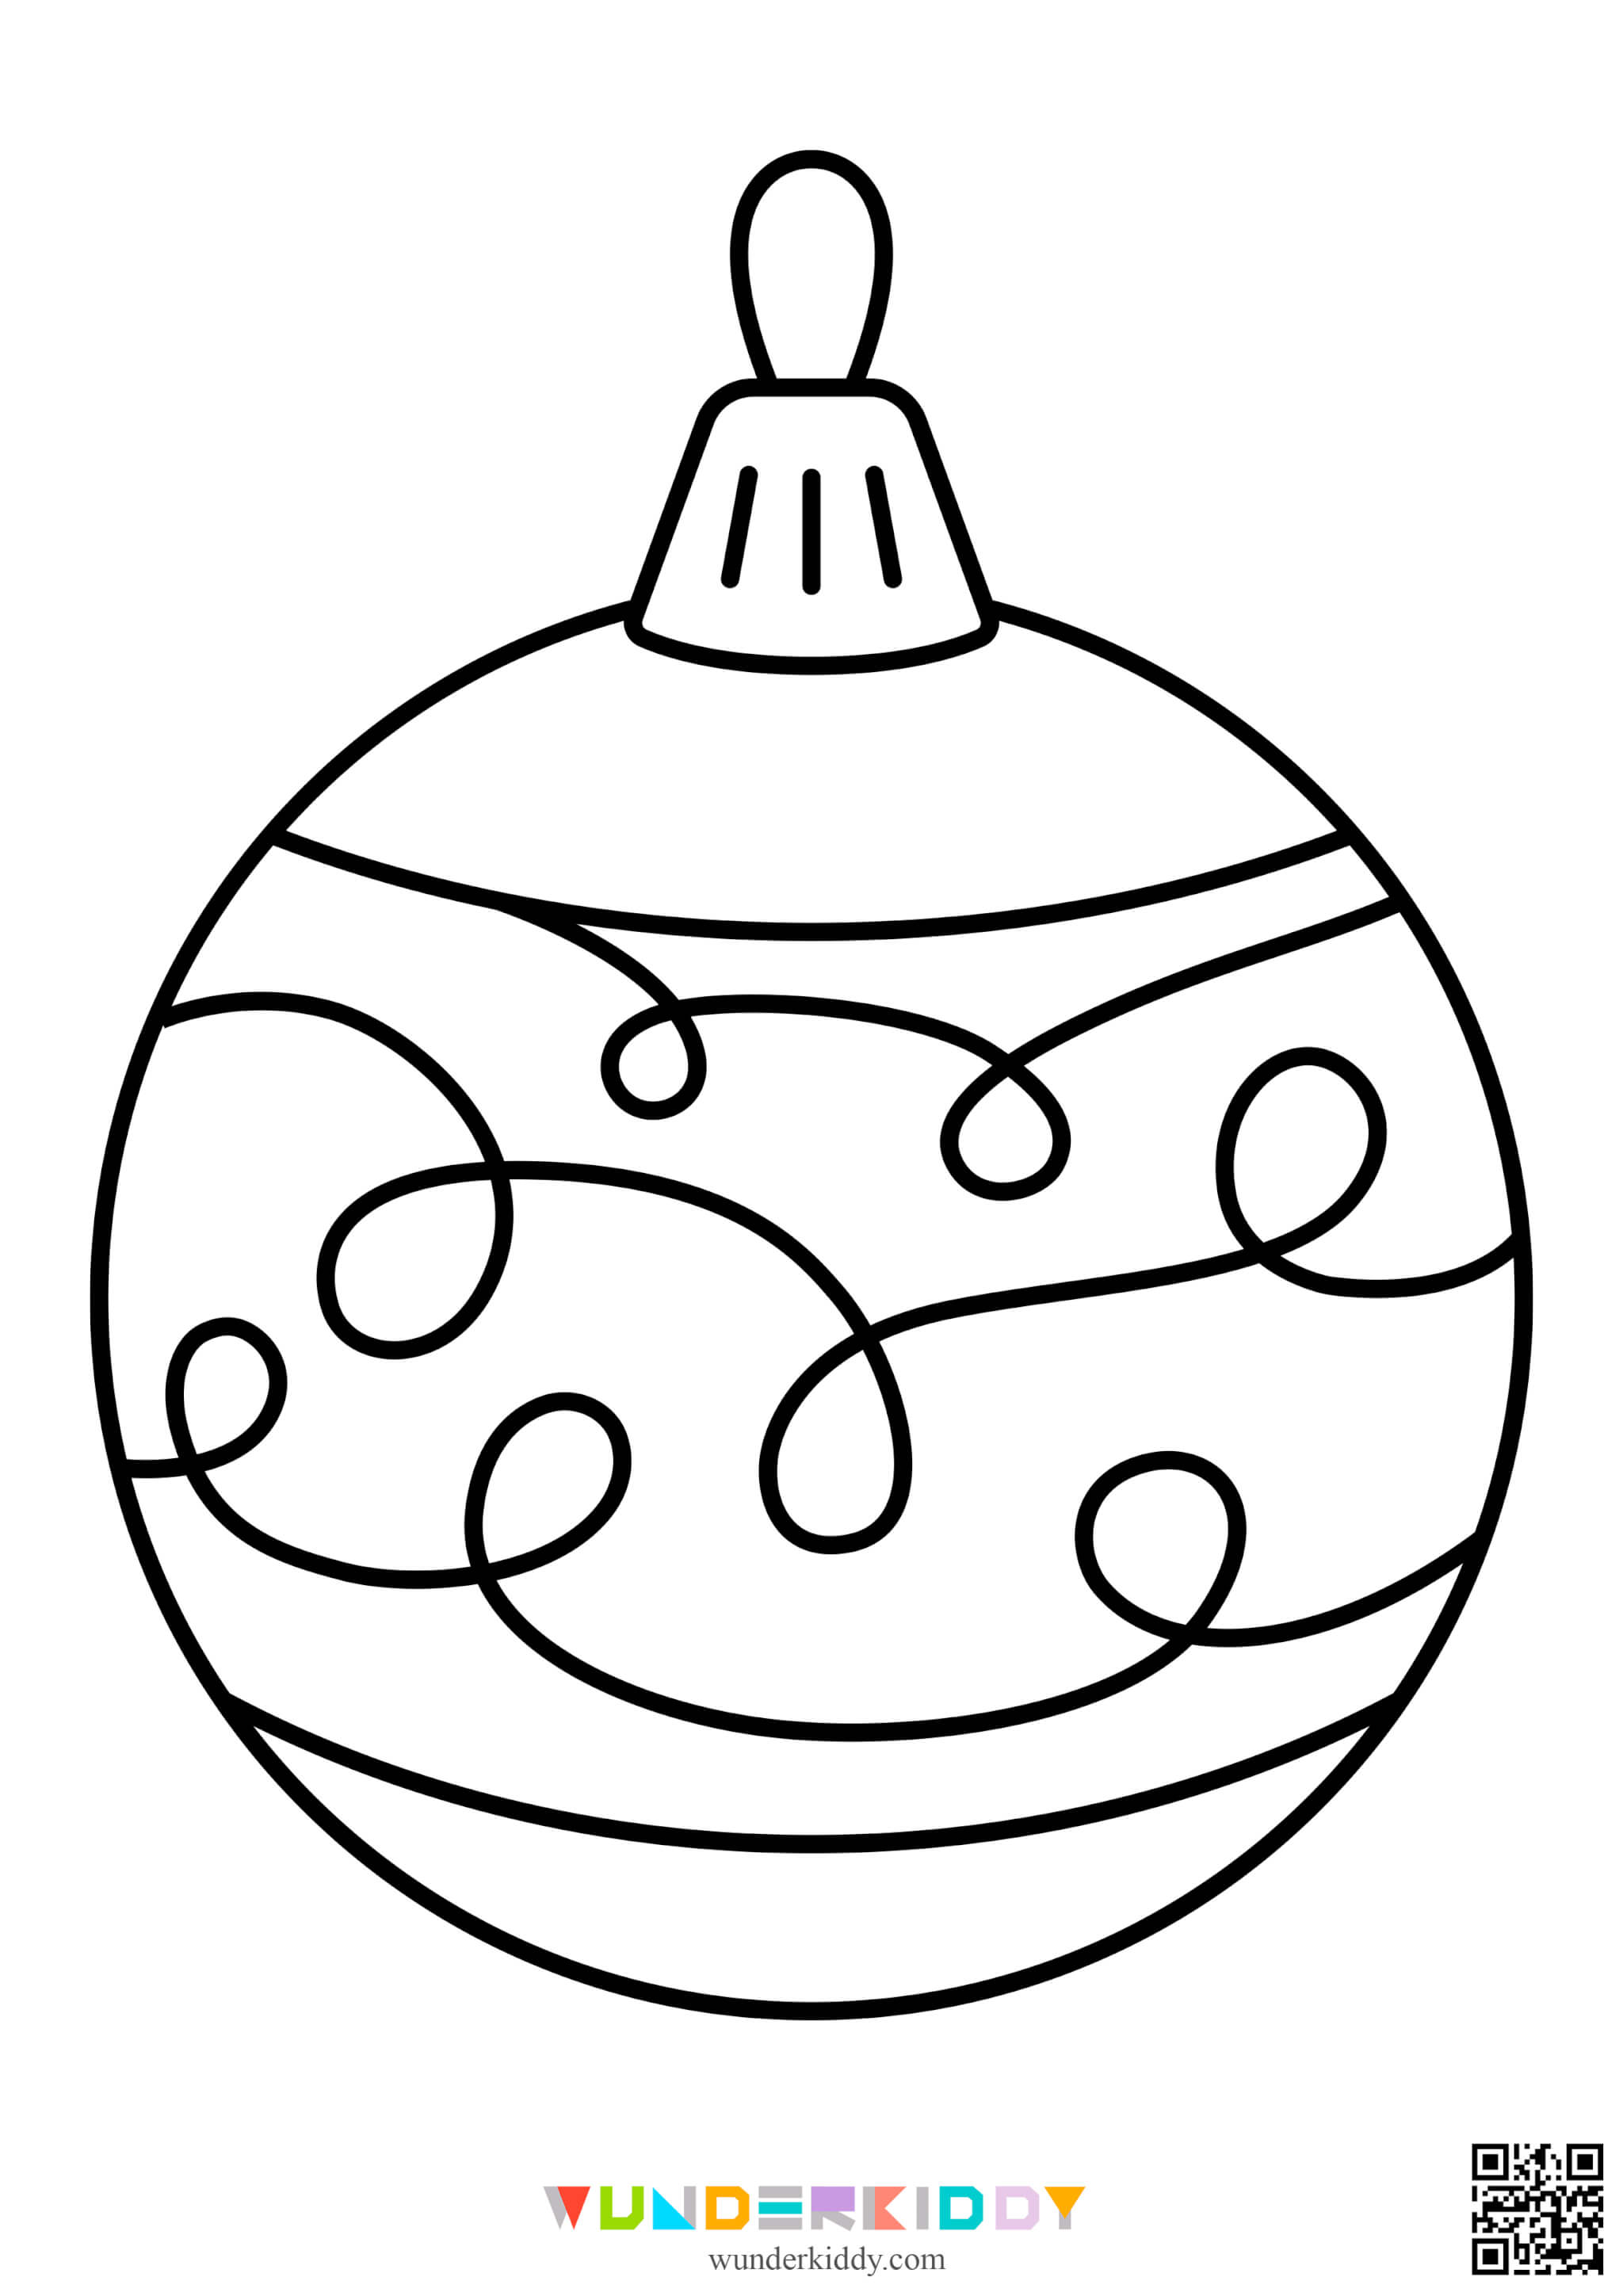 Christmas Ornament Coloring Pages - Image 16